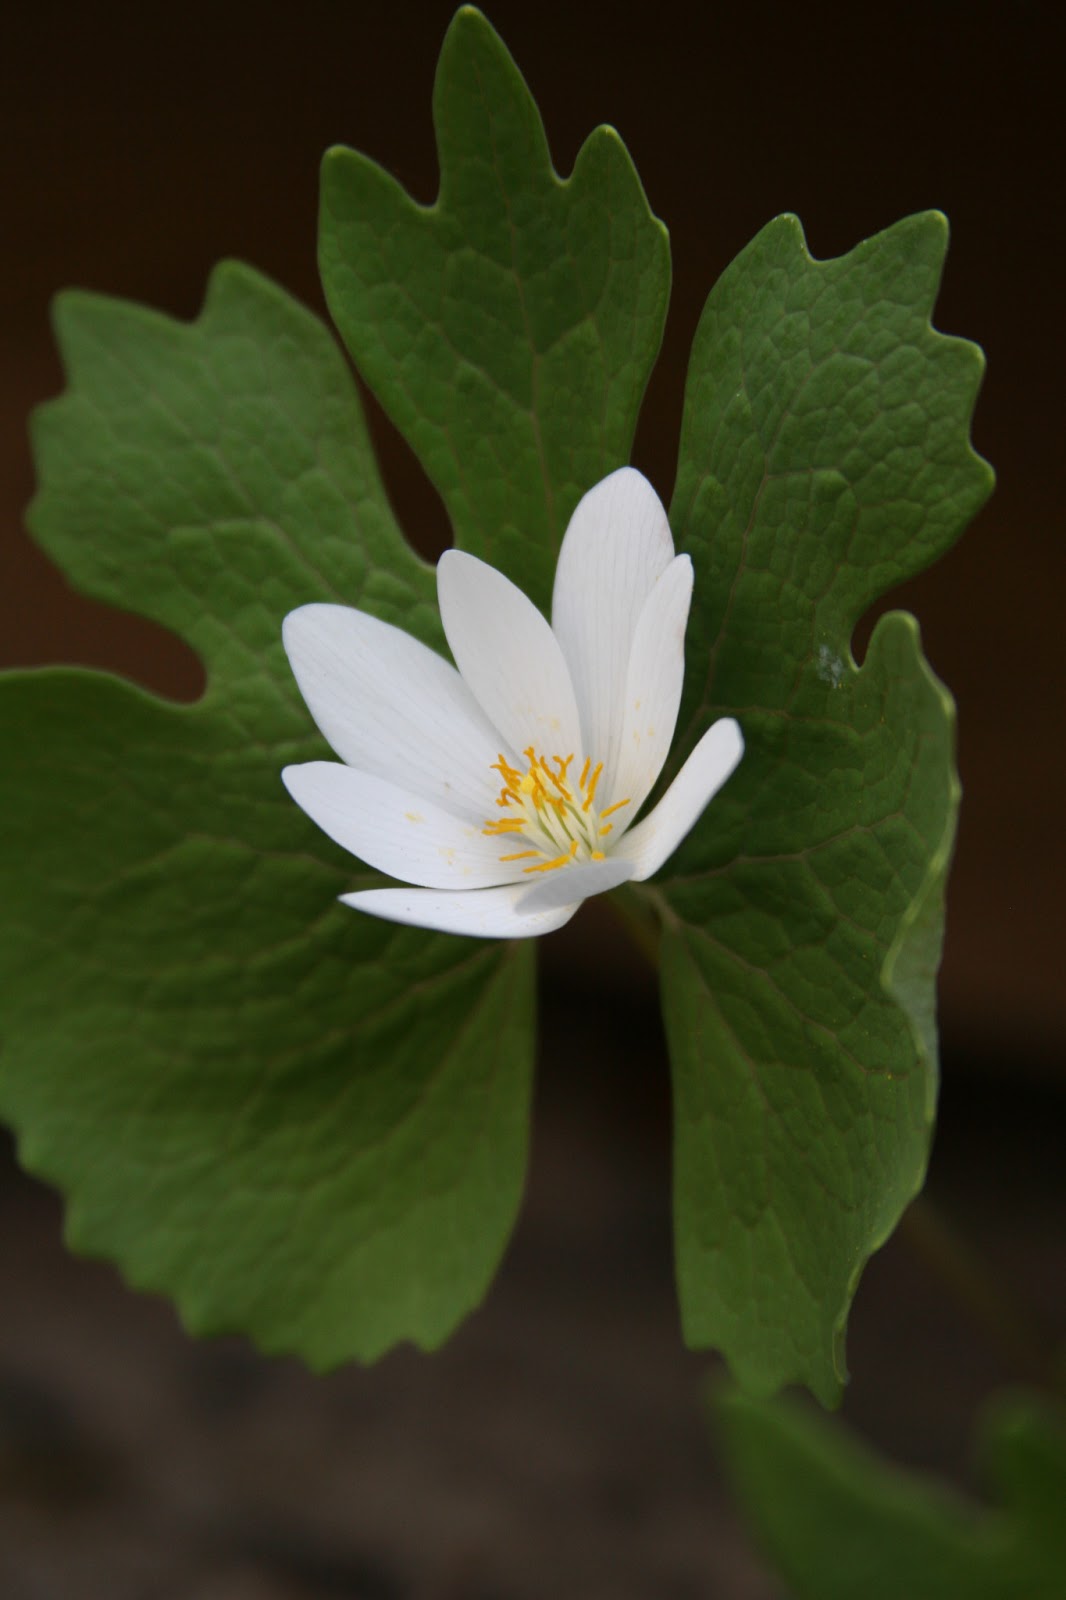 bloodroot flower native species profile plants surrounded leaf its